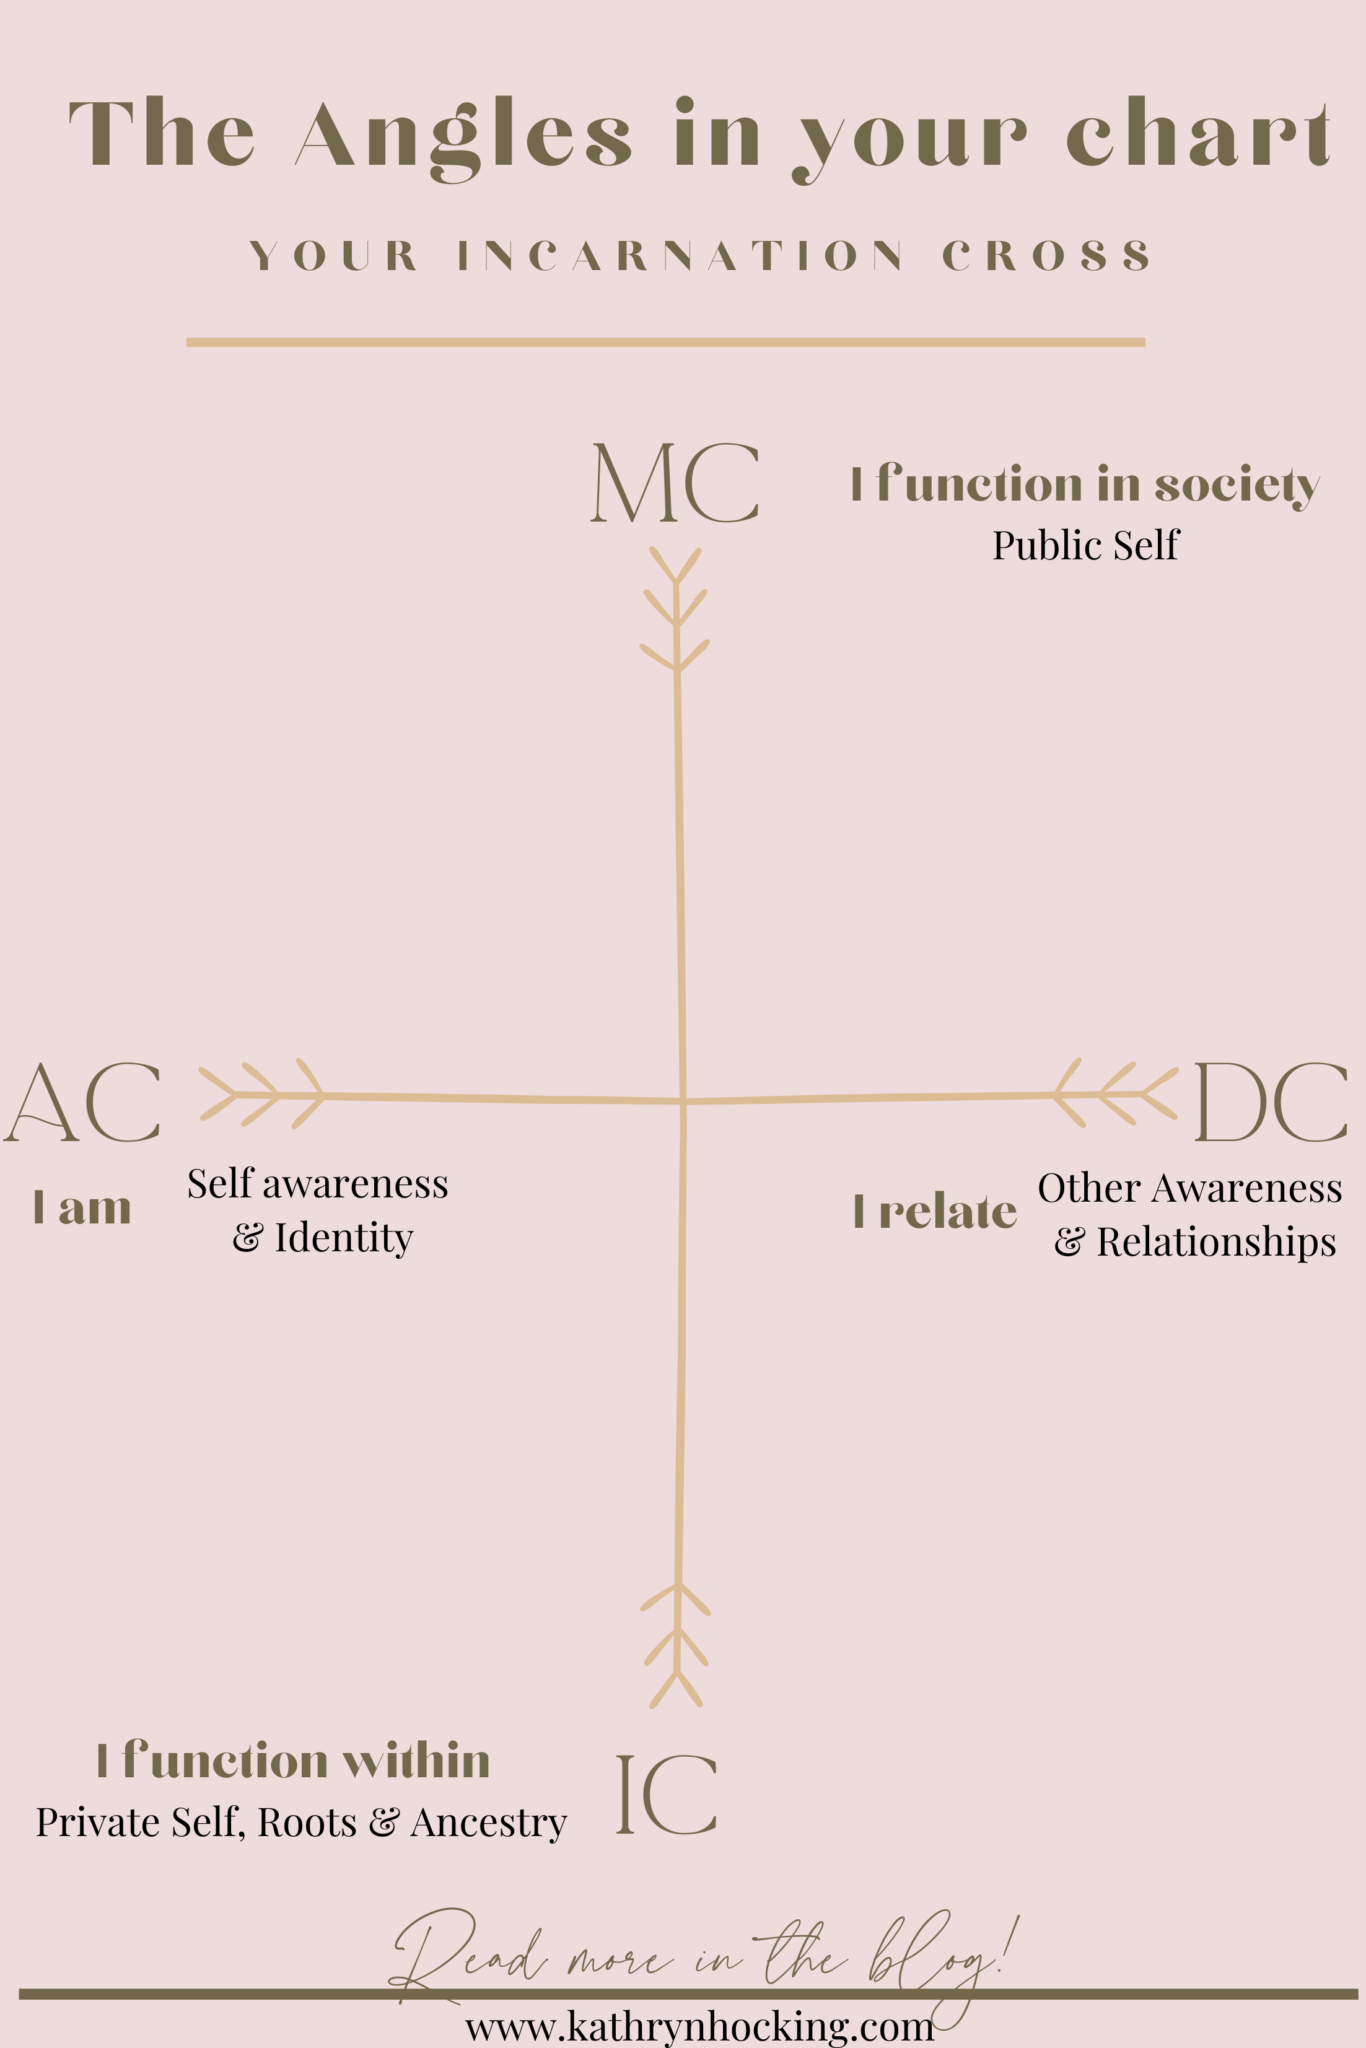 what is ac mc dc ic in astrology